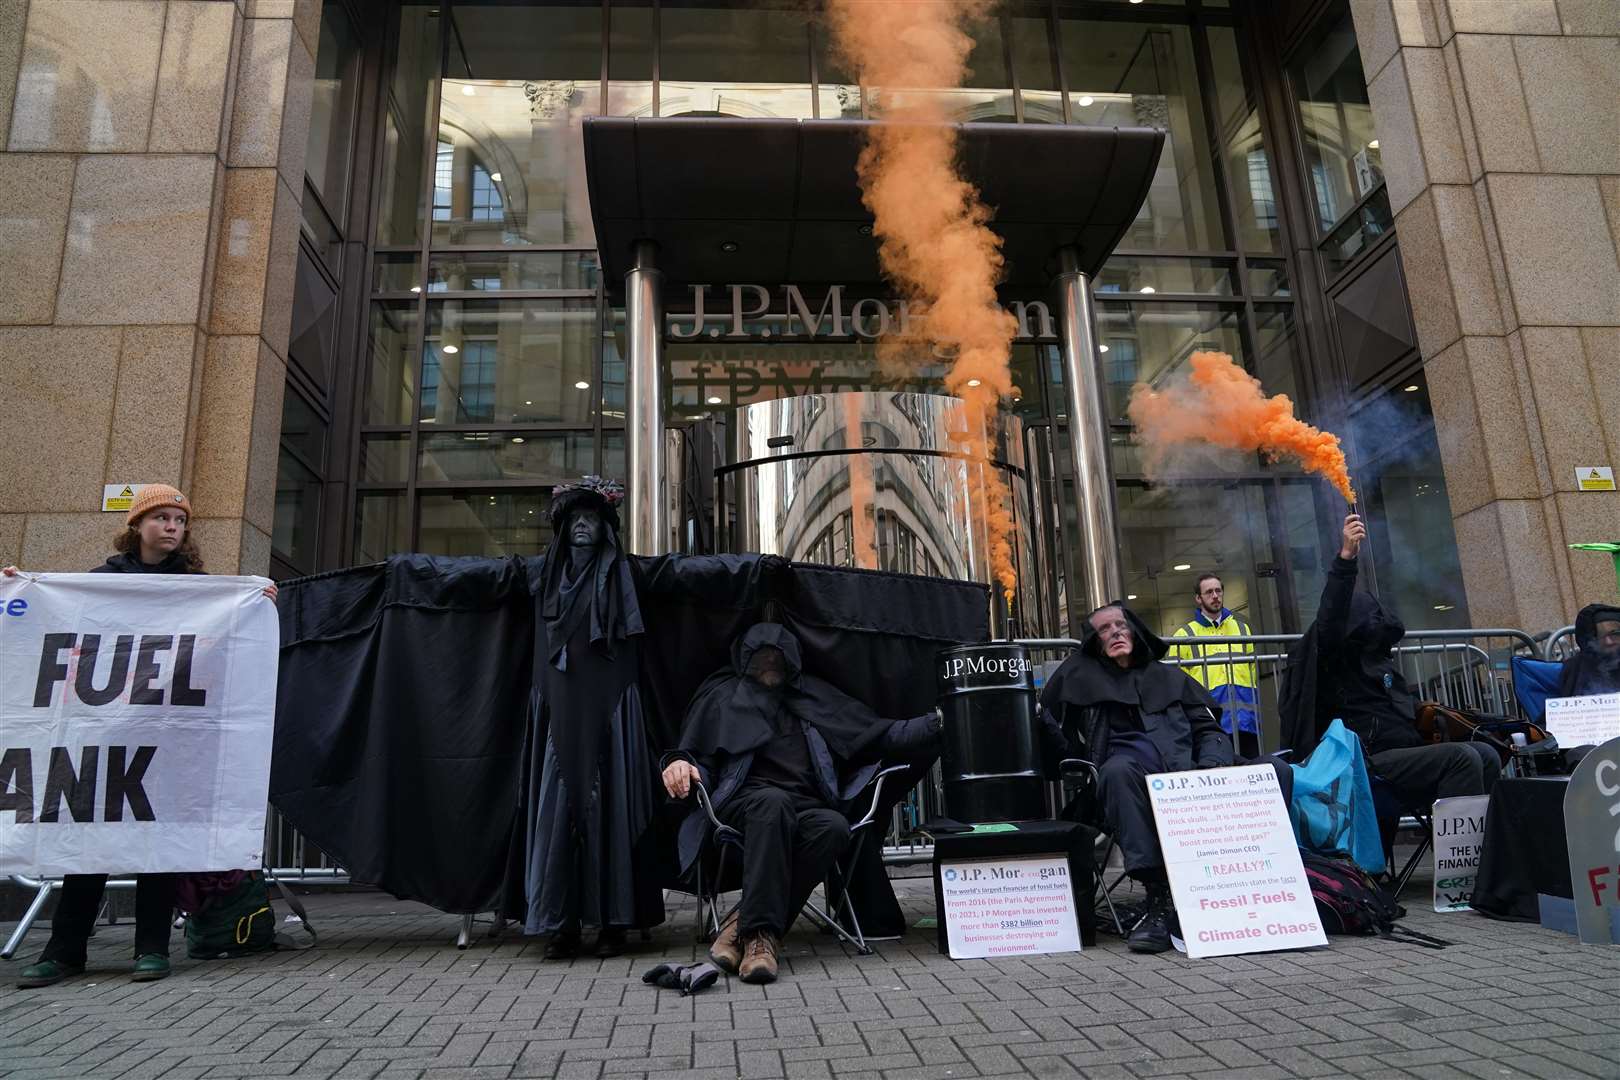 The Oil Slicks, an Extinction Rebellion protest troupe, joined the action outside JP Morgan (Andrew Milligan/PA)